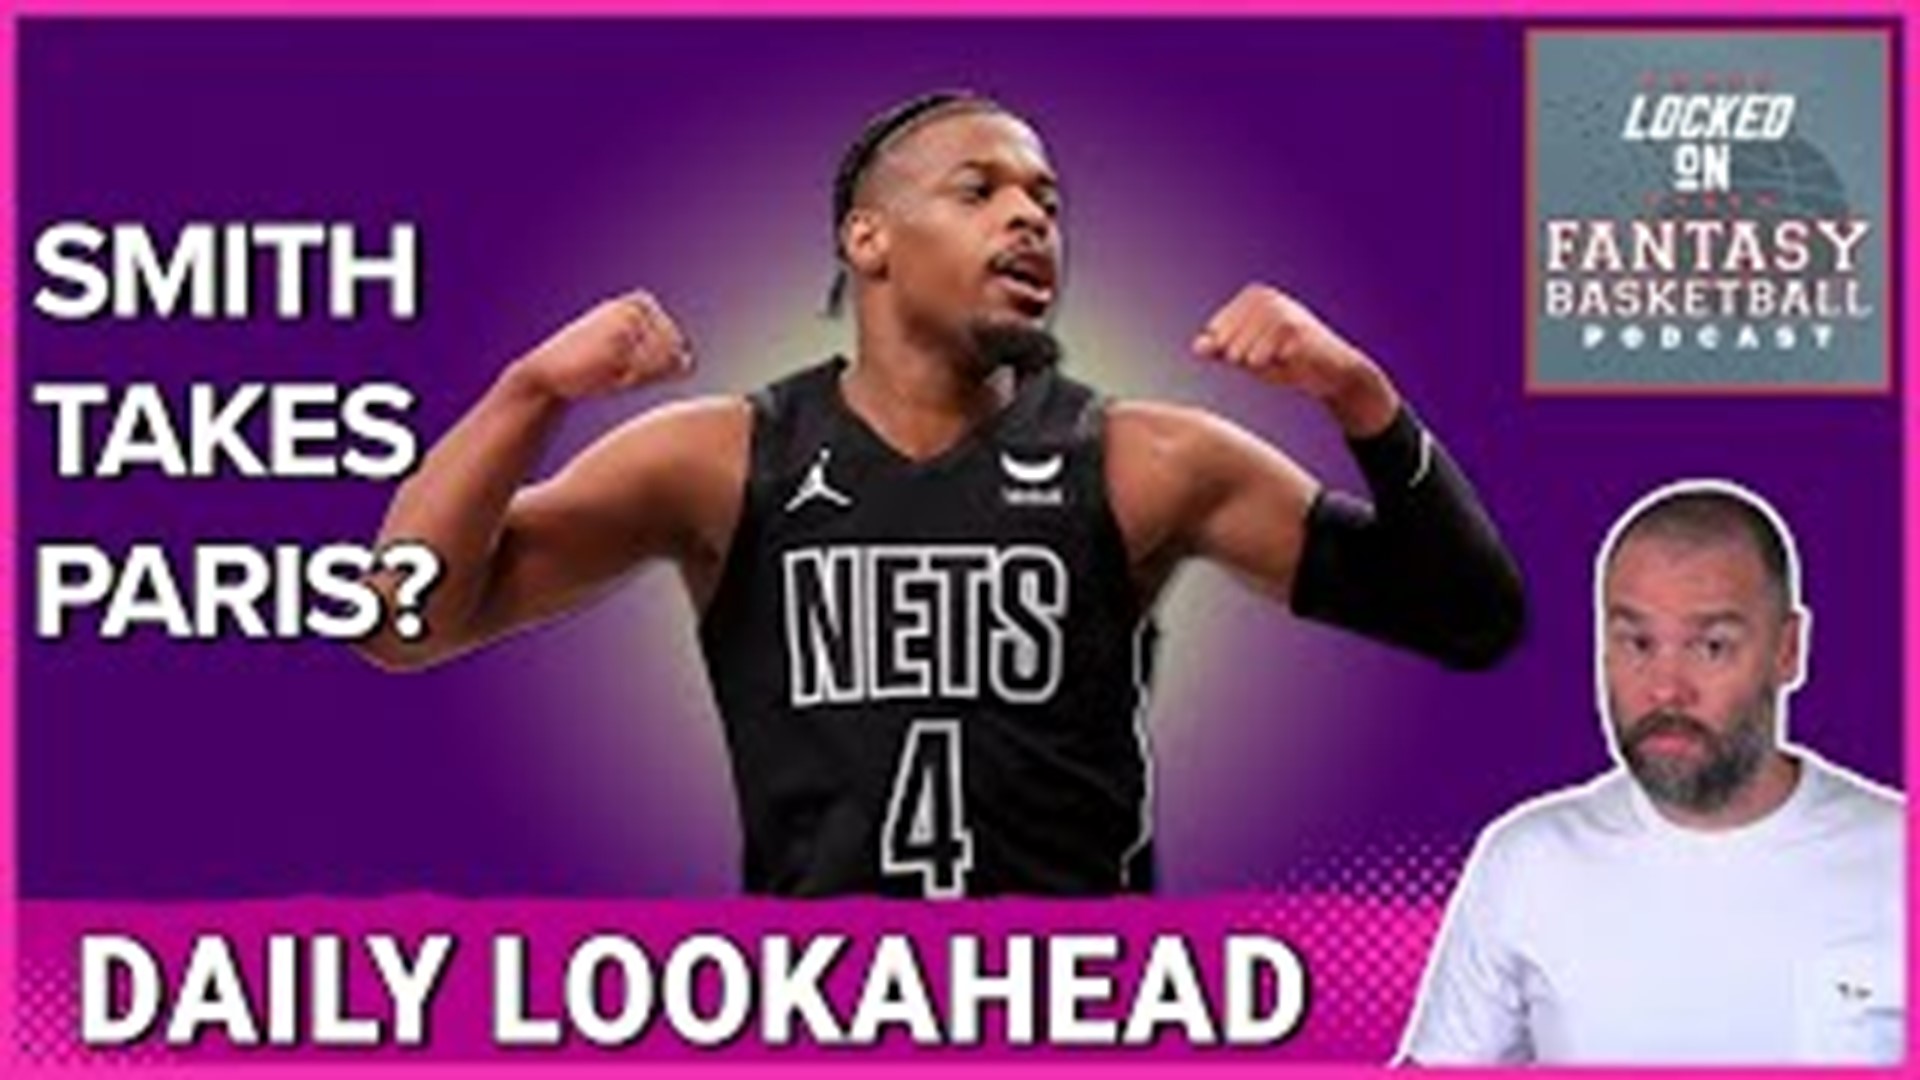 In this episode of NBA Fantasy Basketball, Josh Lloyd provides a thorough lookahead to Thursday's NBA action, with a special emphasis on Dennis Smith Jr.